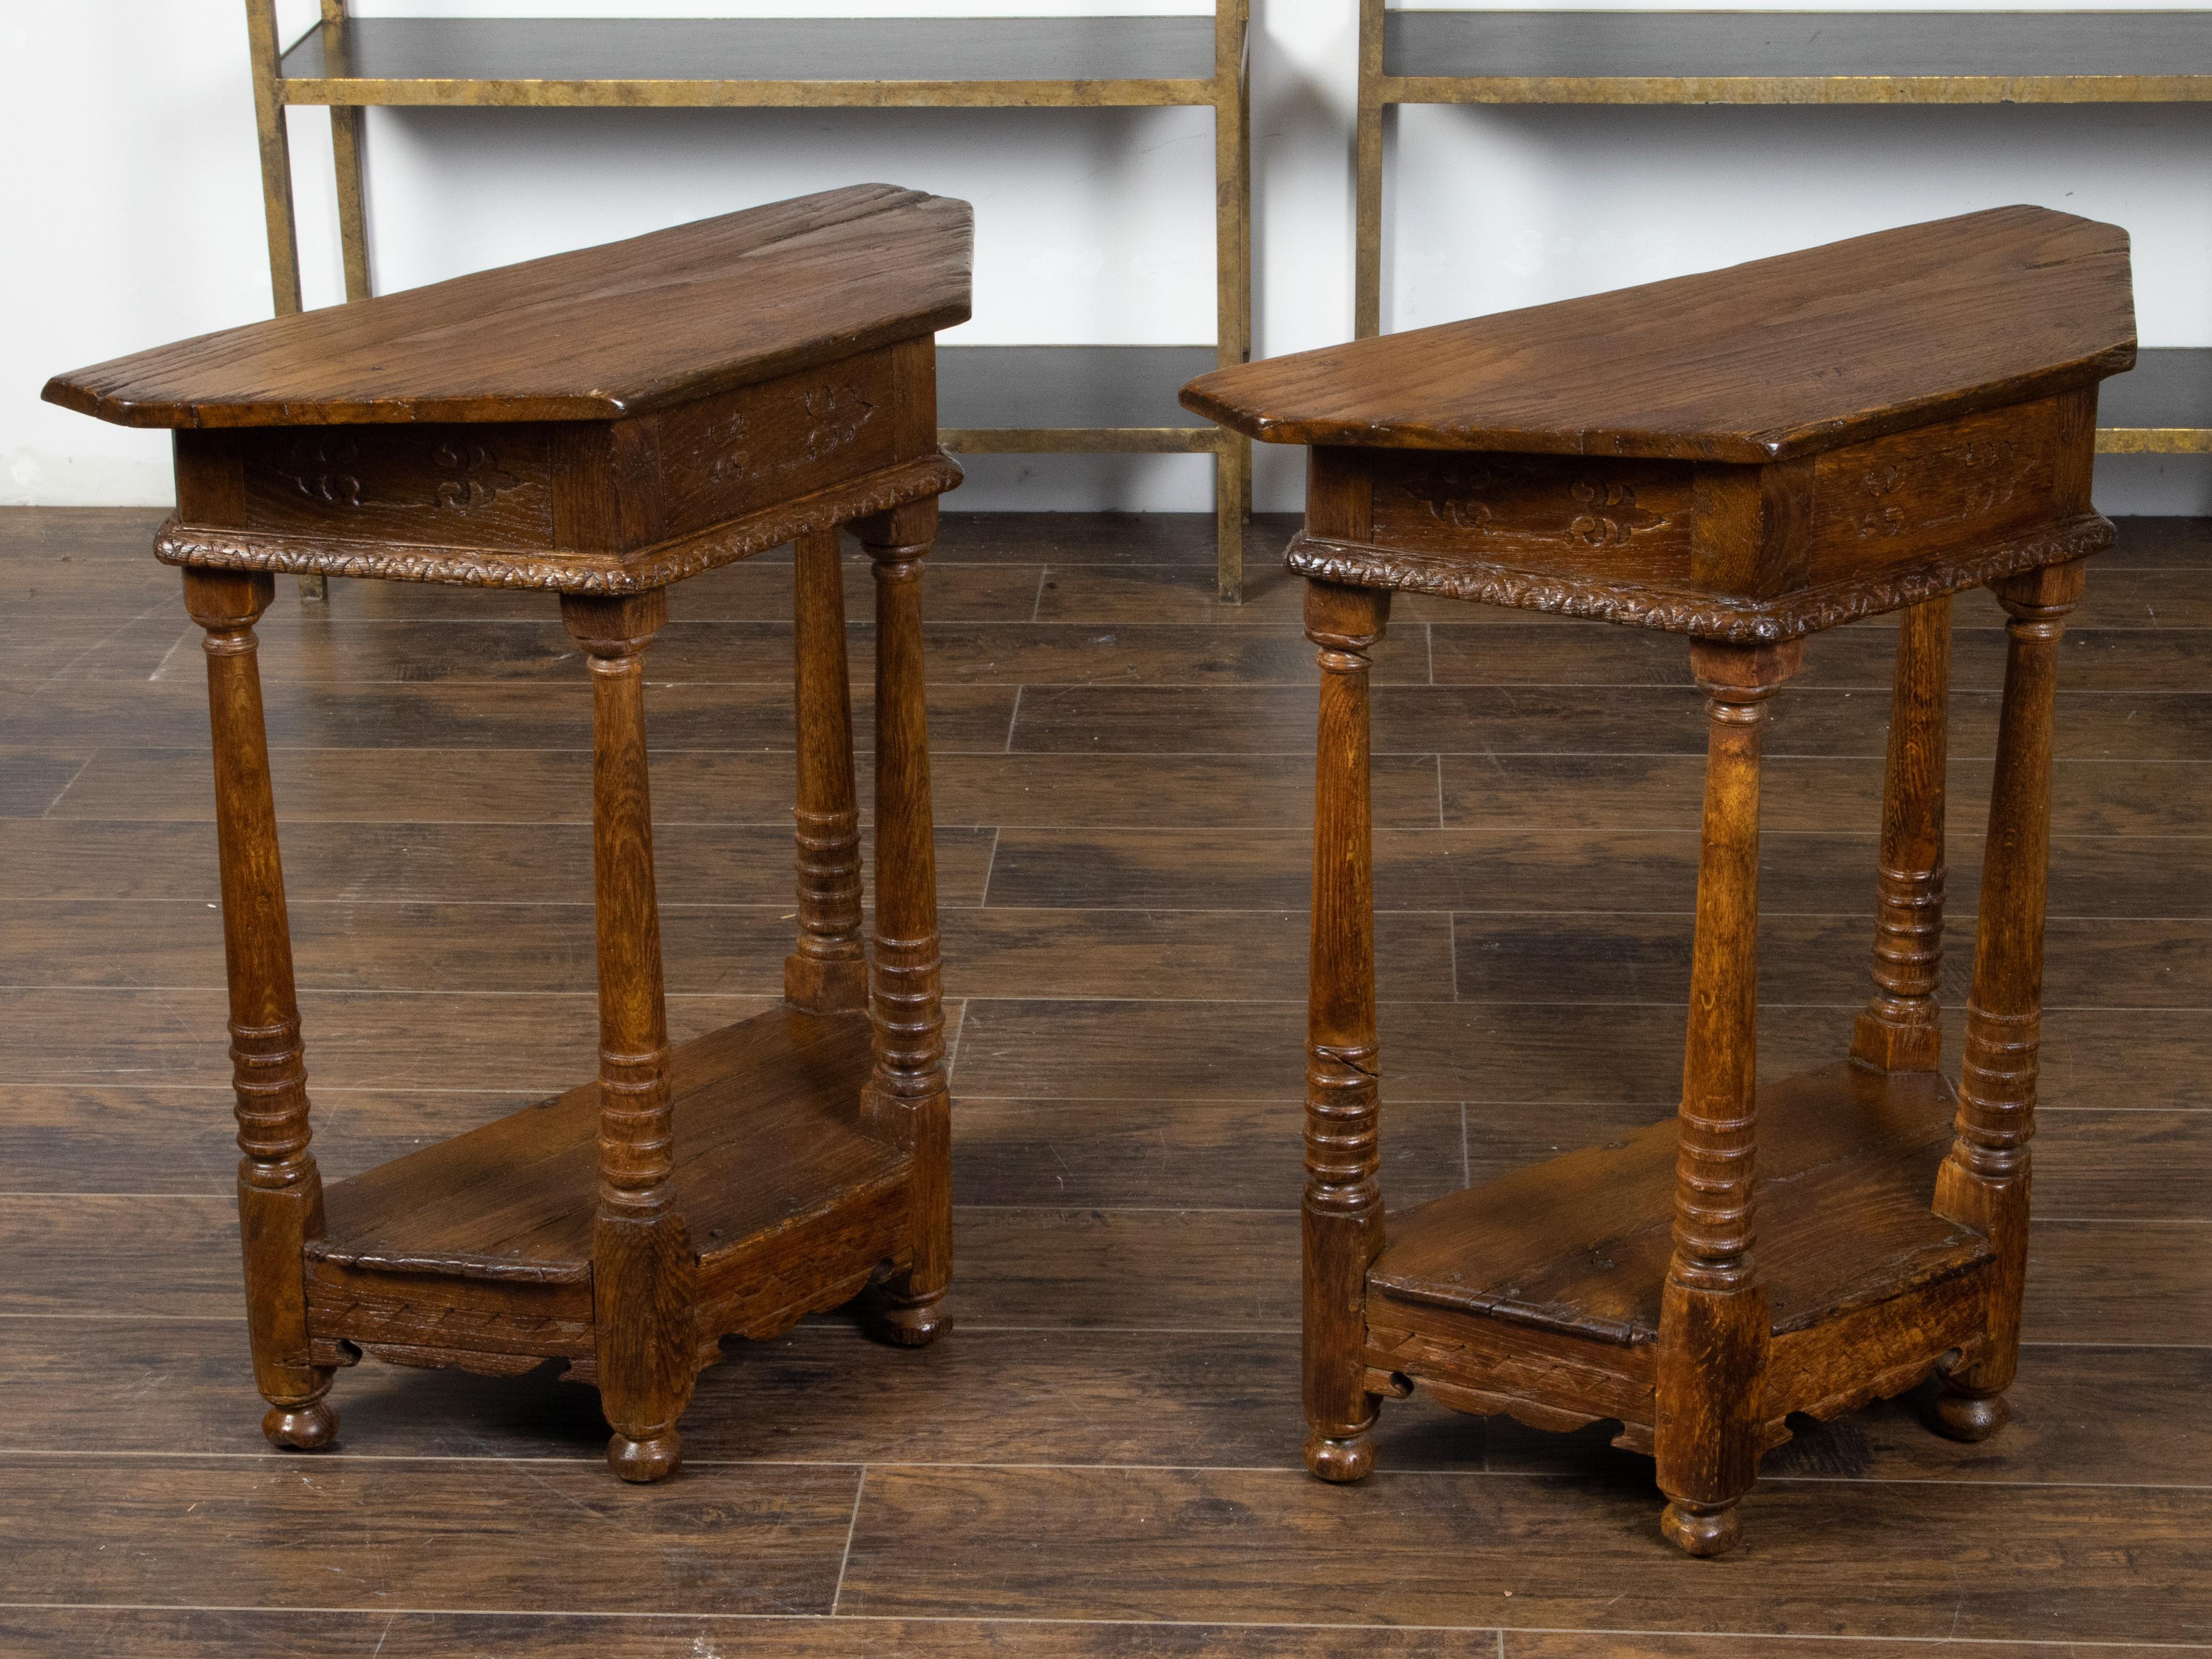 Pair of 19th Century English Carved Oak Demilune Tables with Column Legs For Sale 1